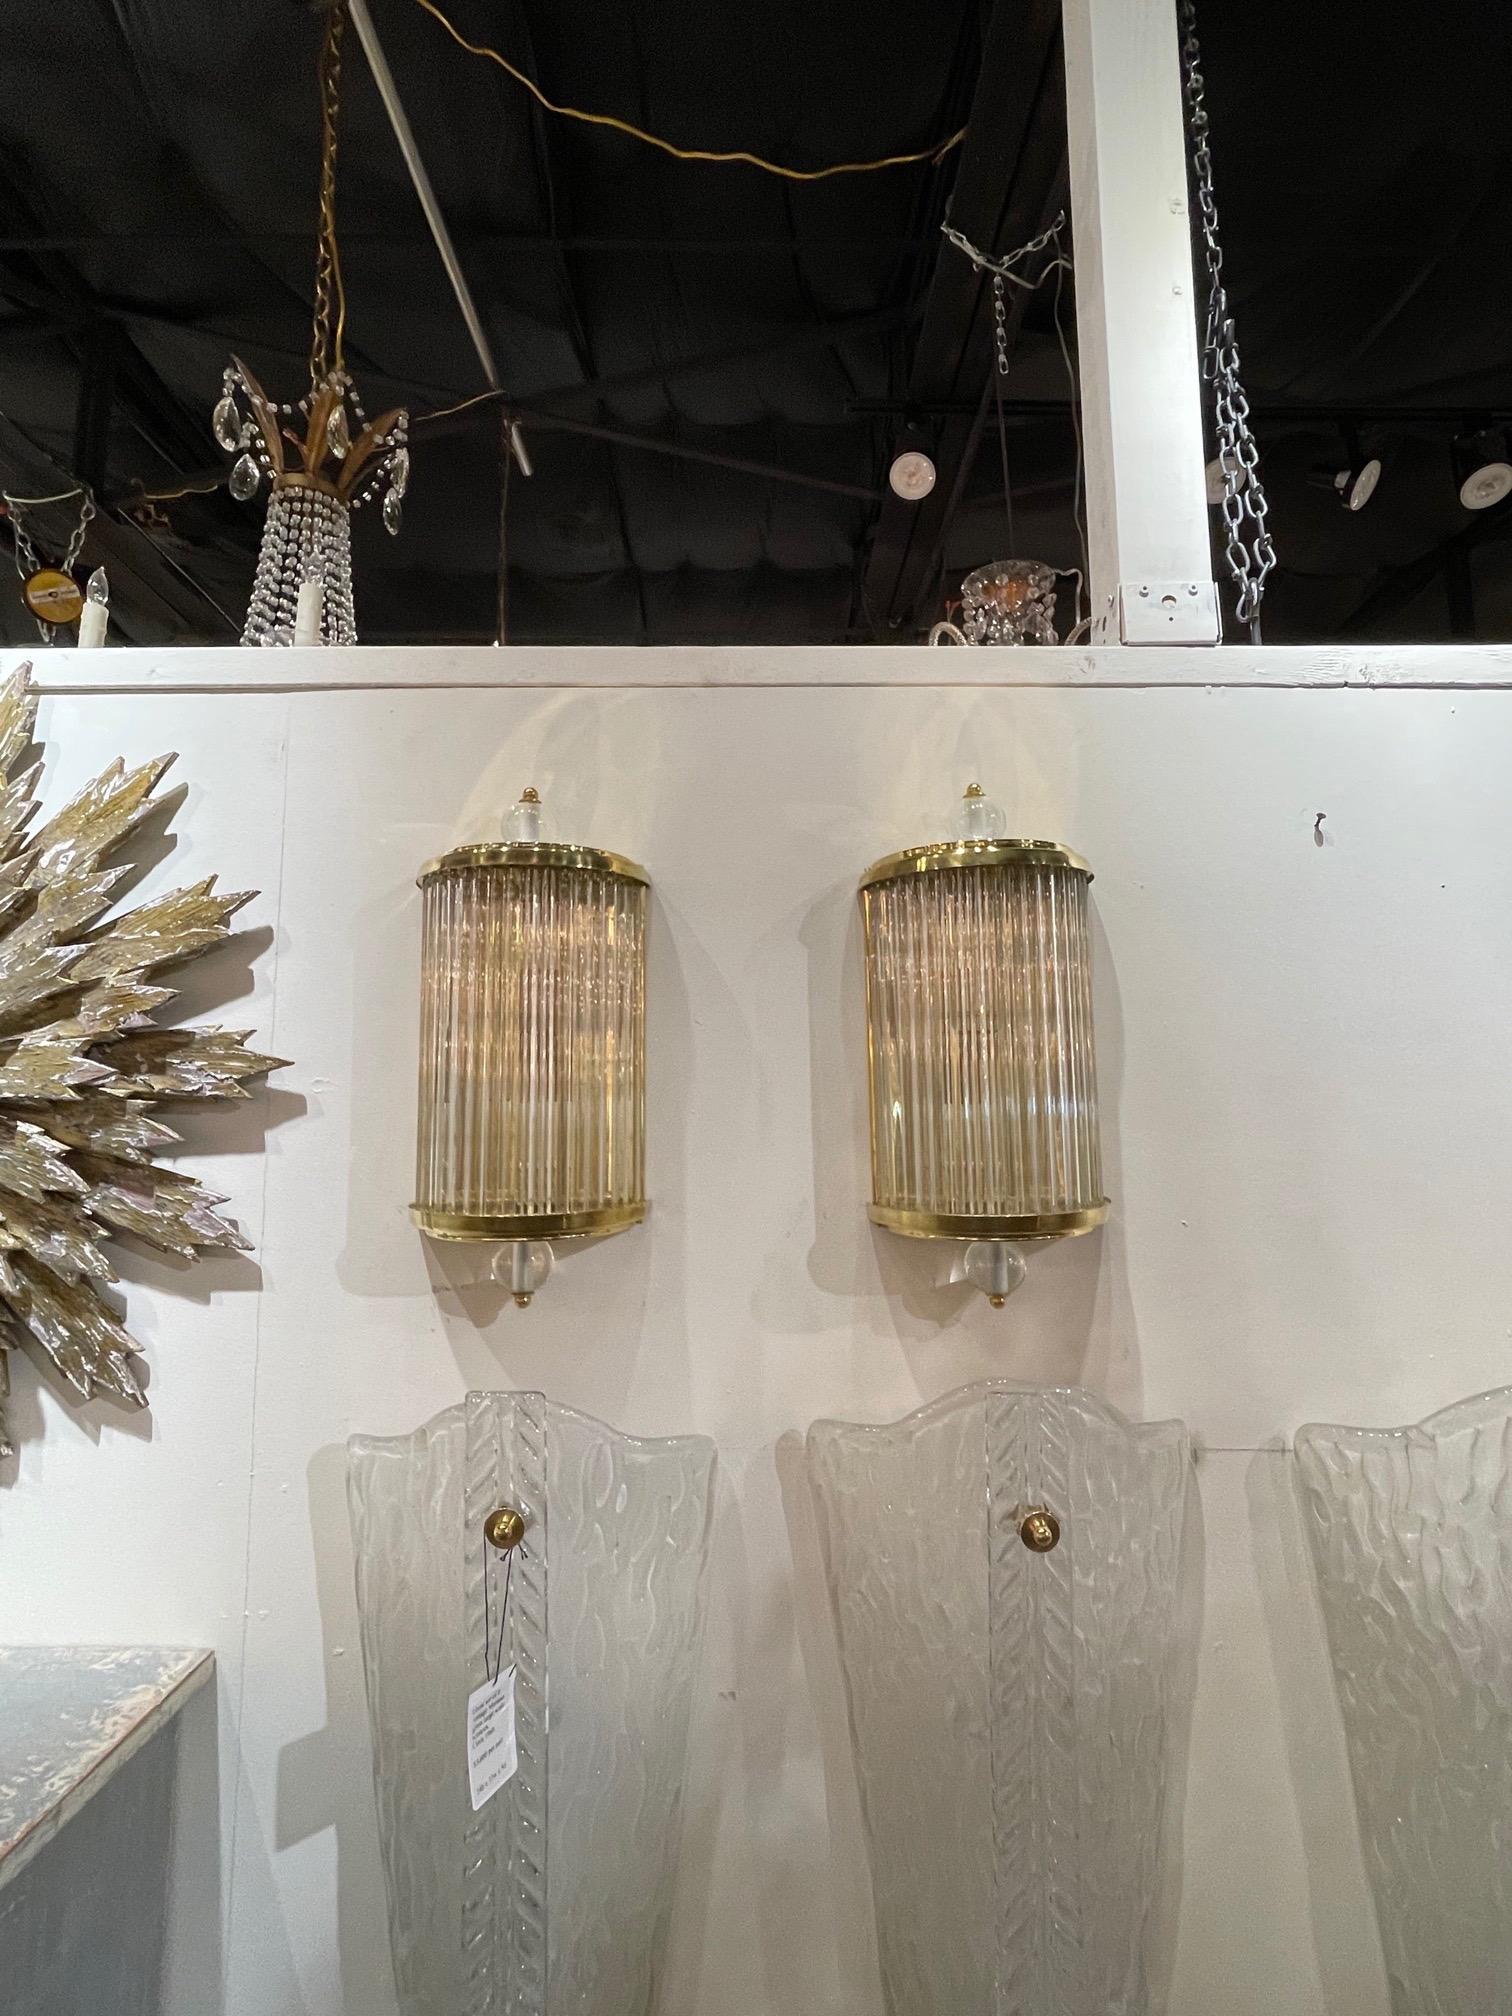 Gorgeous pair of Murano glass and brass barber style sconces. Excellent quality and these beauties glisten!
So pretty!!